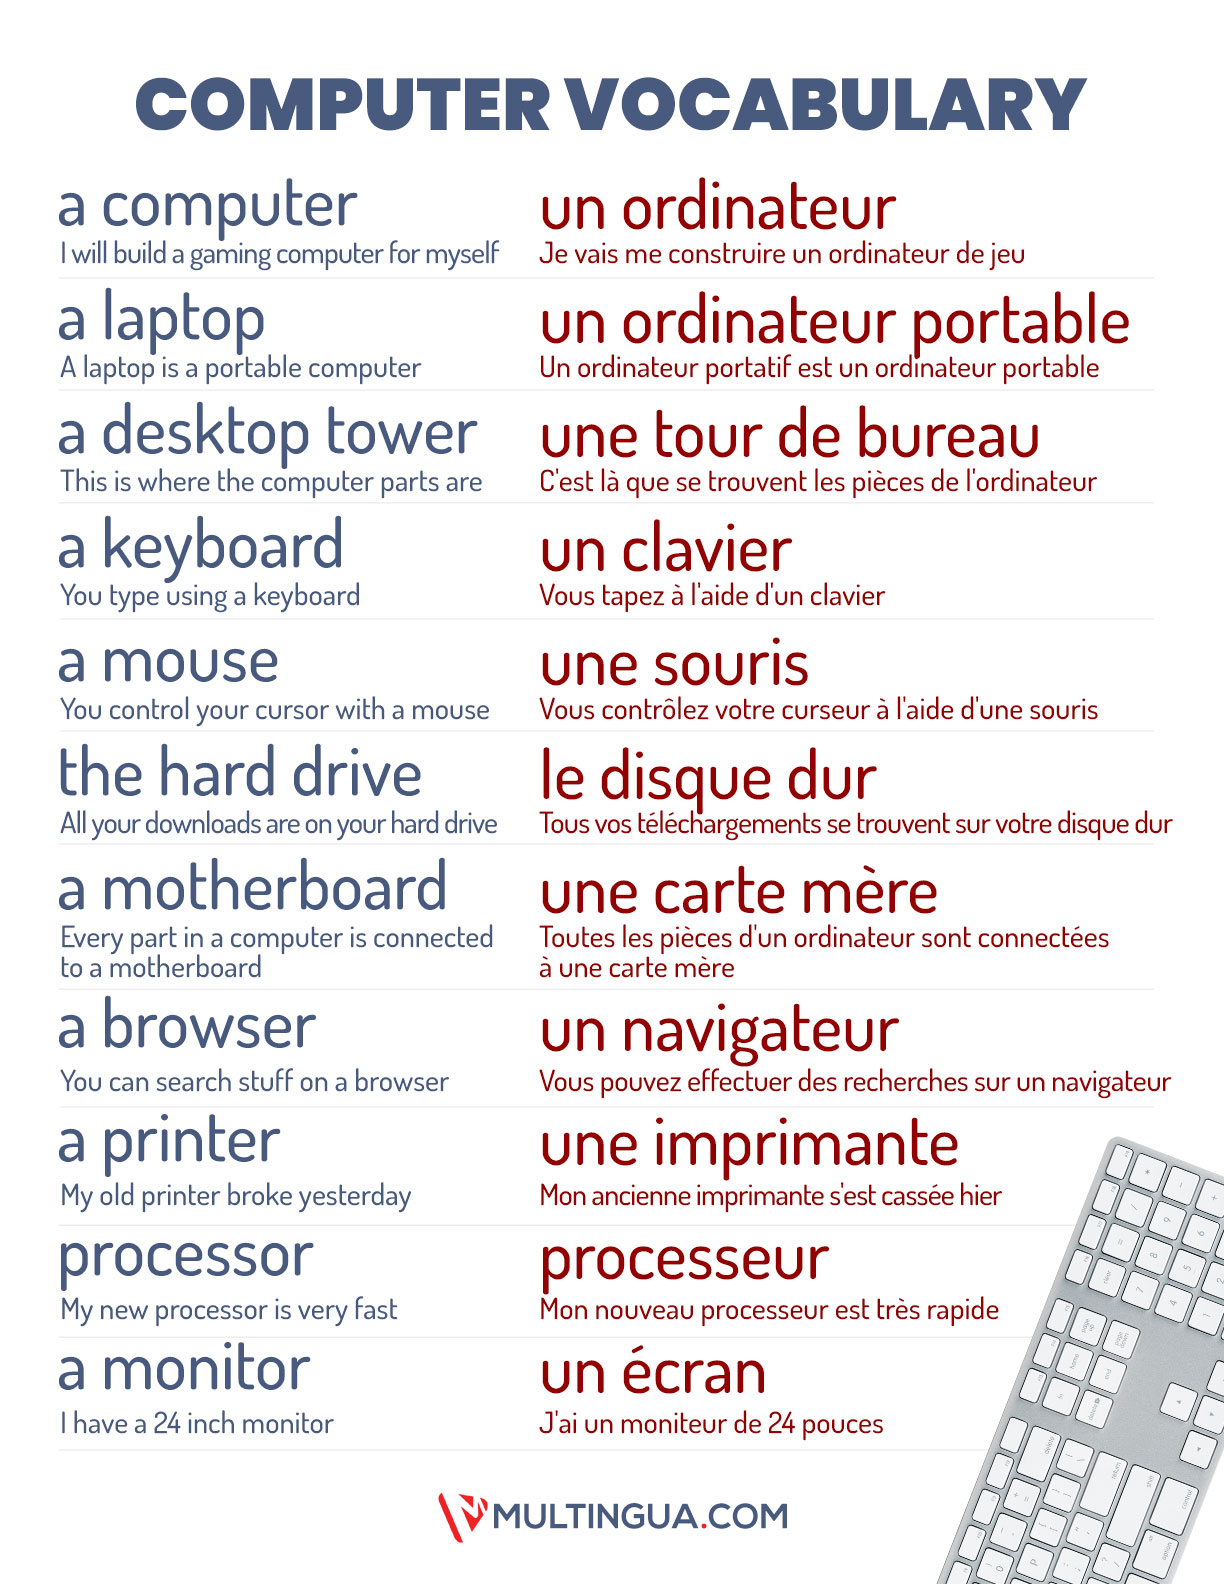 French computer vocabulary